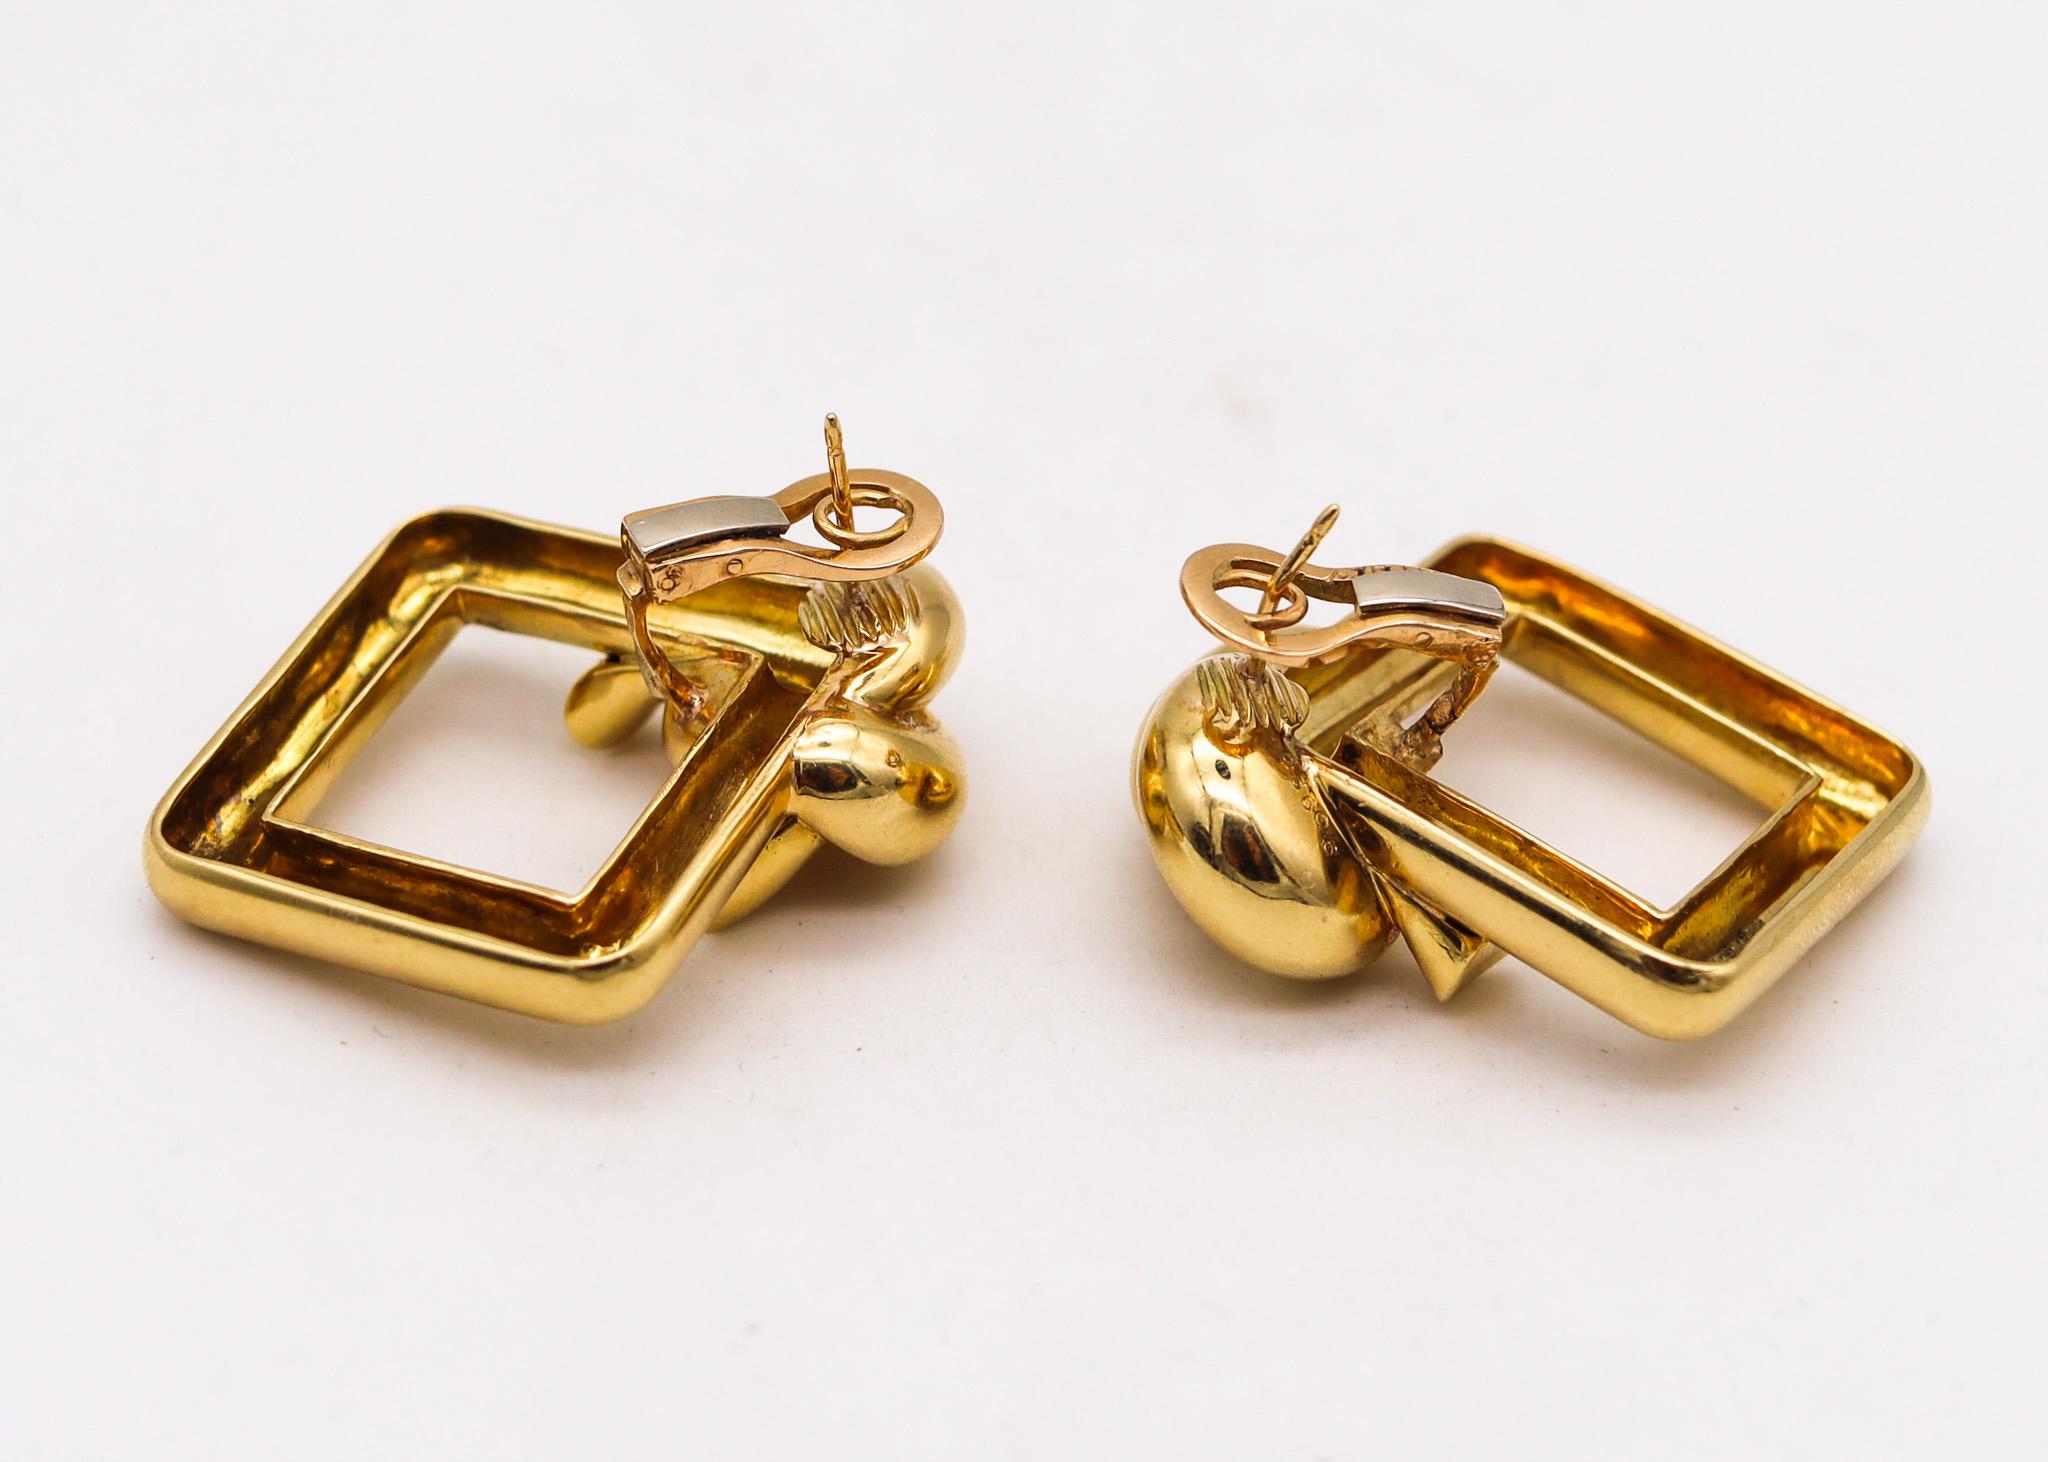 Modernist Cartier 1970 Geometric Squares and Knots Earrings in 18 Karat Yellow Gold